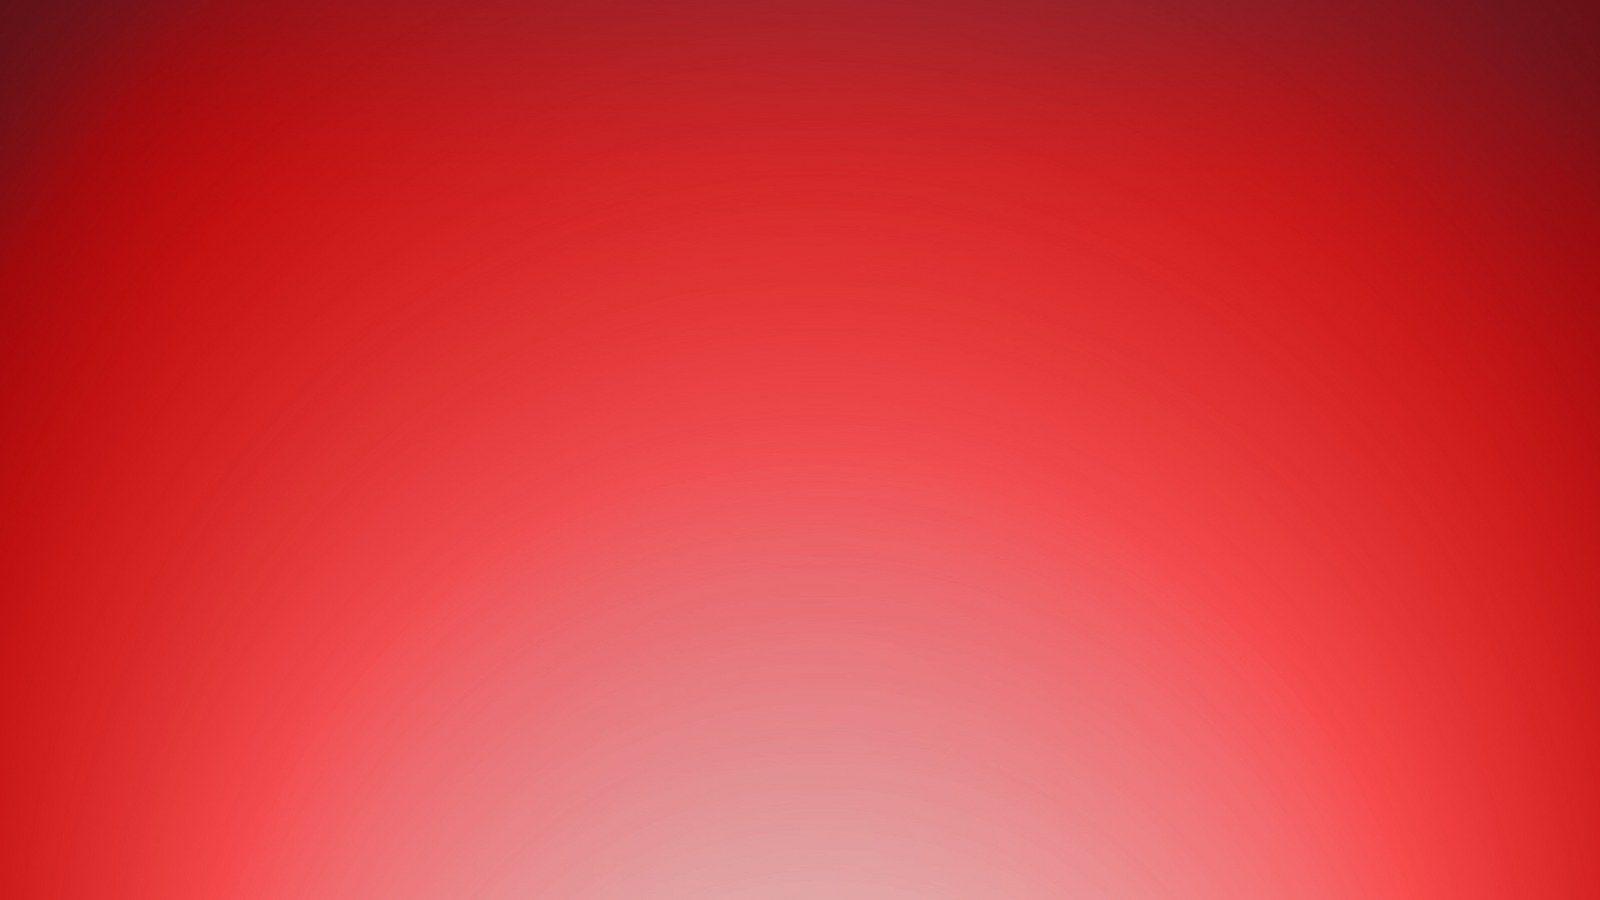 Backgrounds Red - Wallpaper Cave